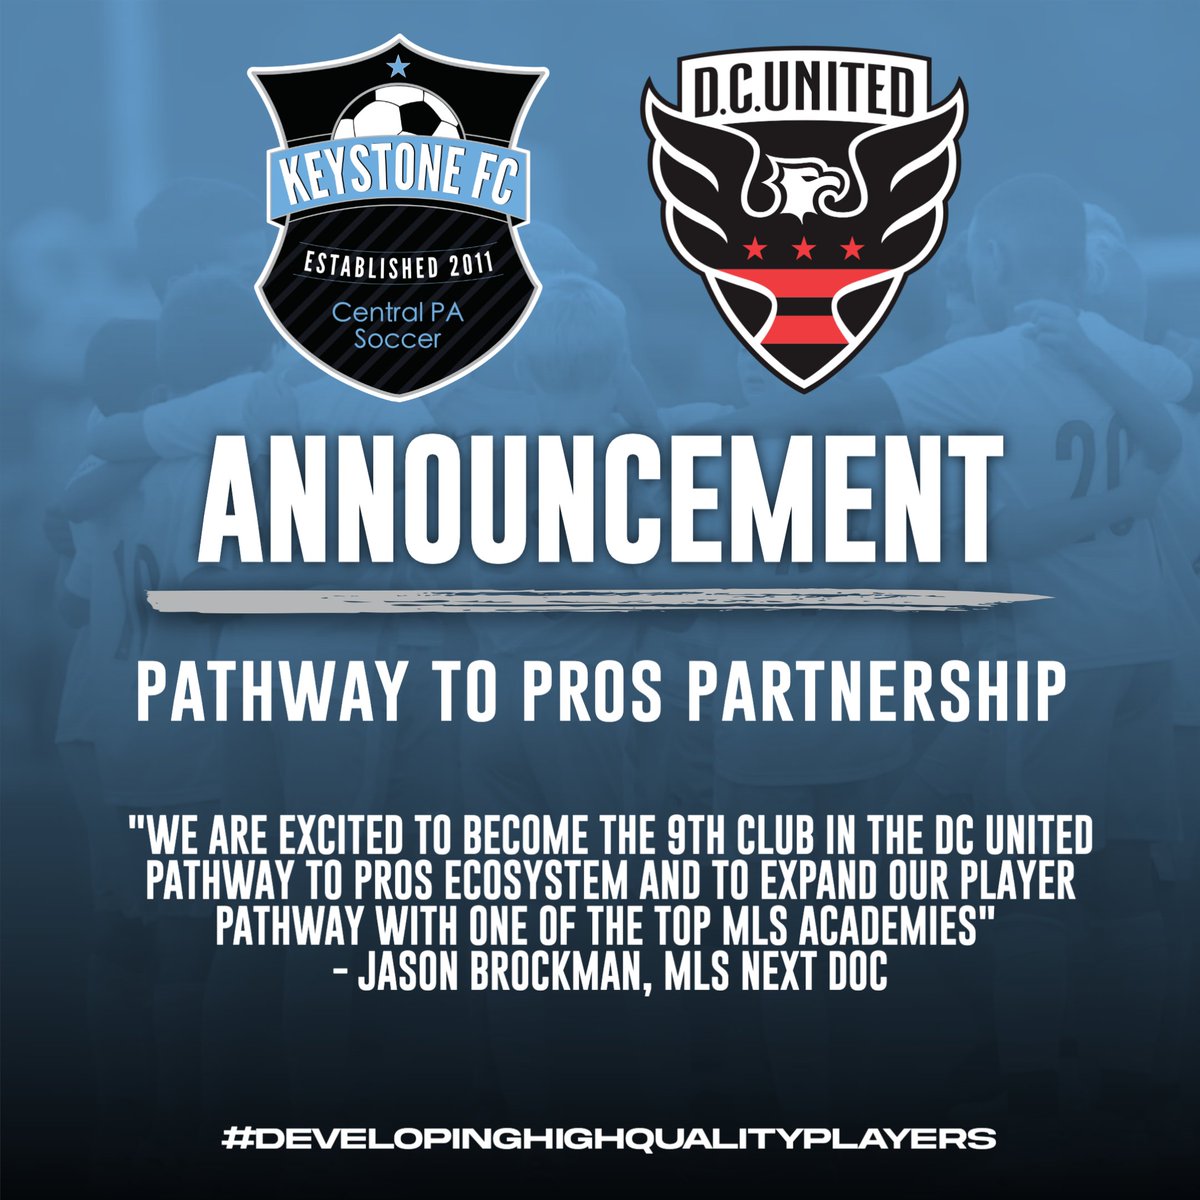 Keystone FC is excited to announce our partnership with @dcunited. Through this partnership Keystone FC and DC United will work together to provide opportunities to Keystone FC players. #developinghighqualityplayers